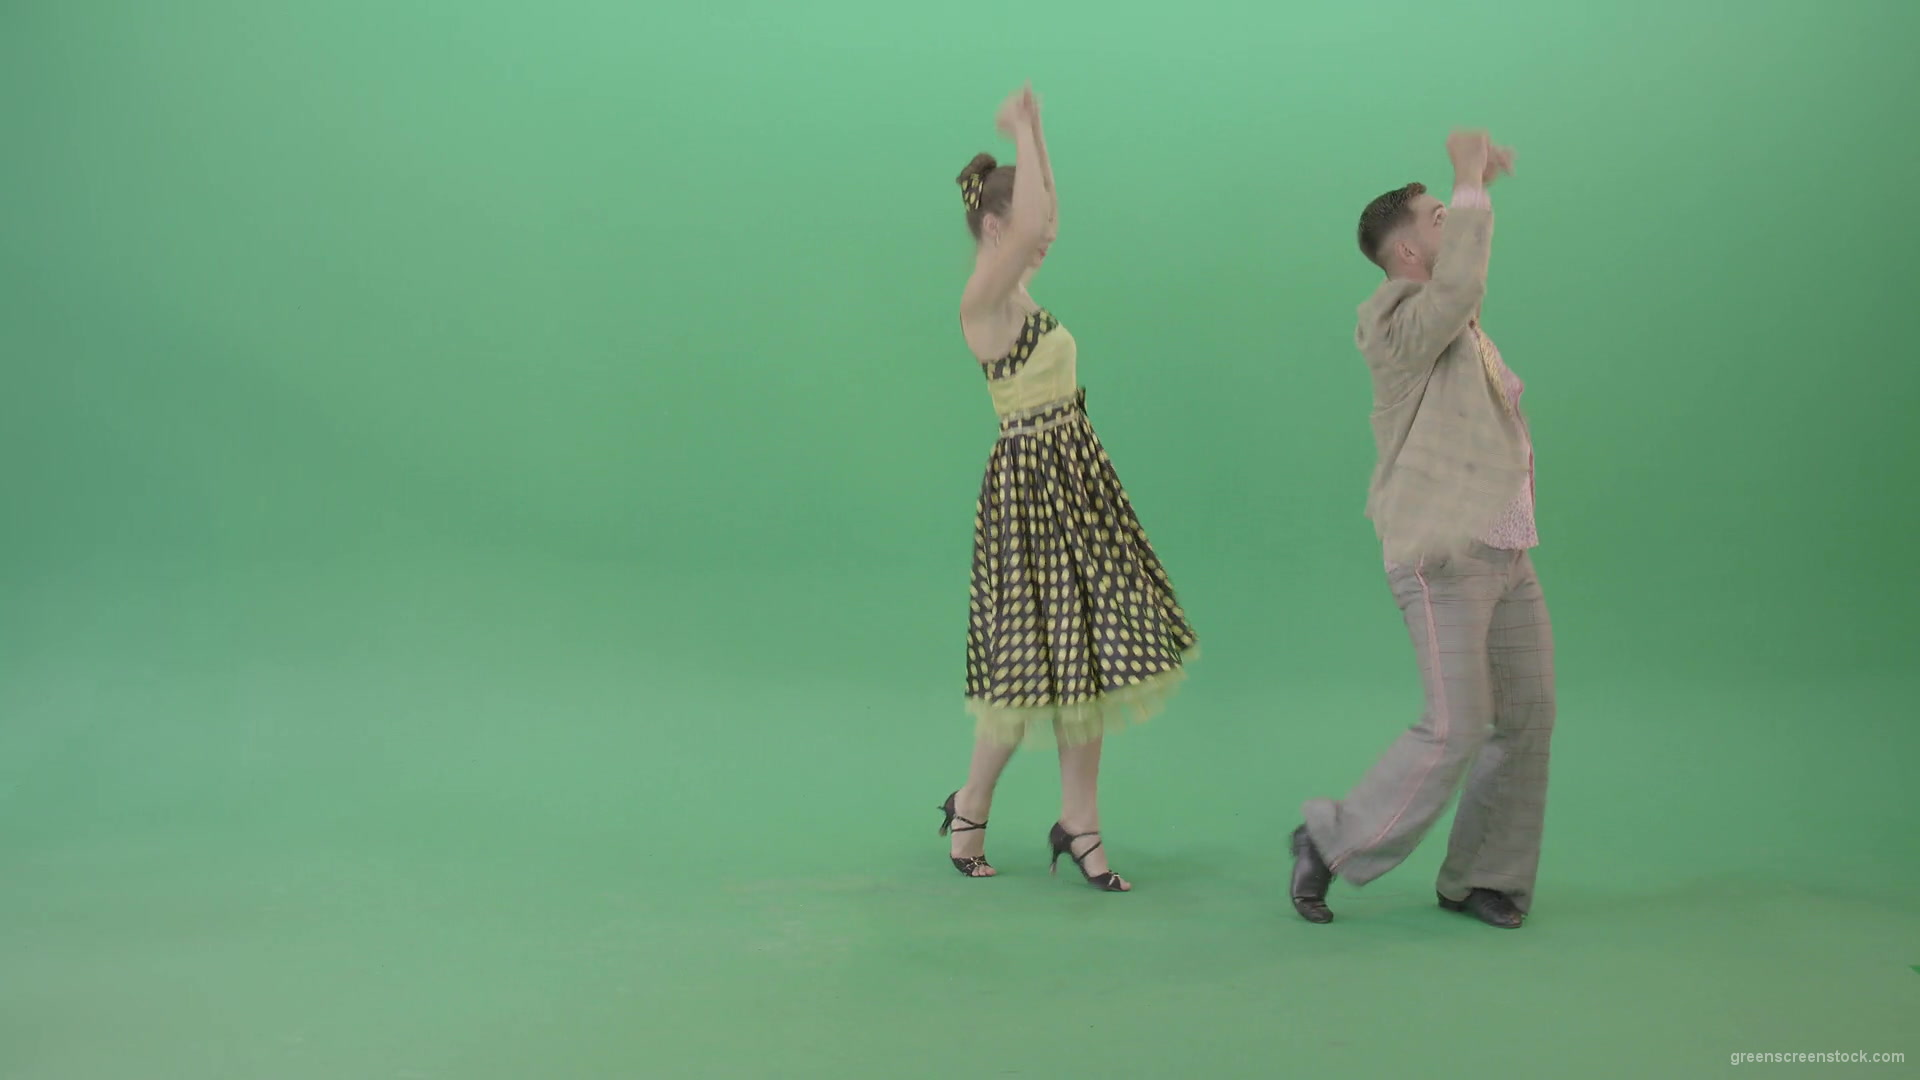 Rock-and-Roll-Dance-by-happy-boy-and-girl-dancing-Lindy-hop-and-swing-isolated-on-CHroma-Key-Green-Screen-Video-Footage-1920_008 Green Screen Stock